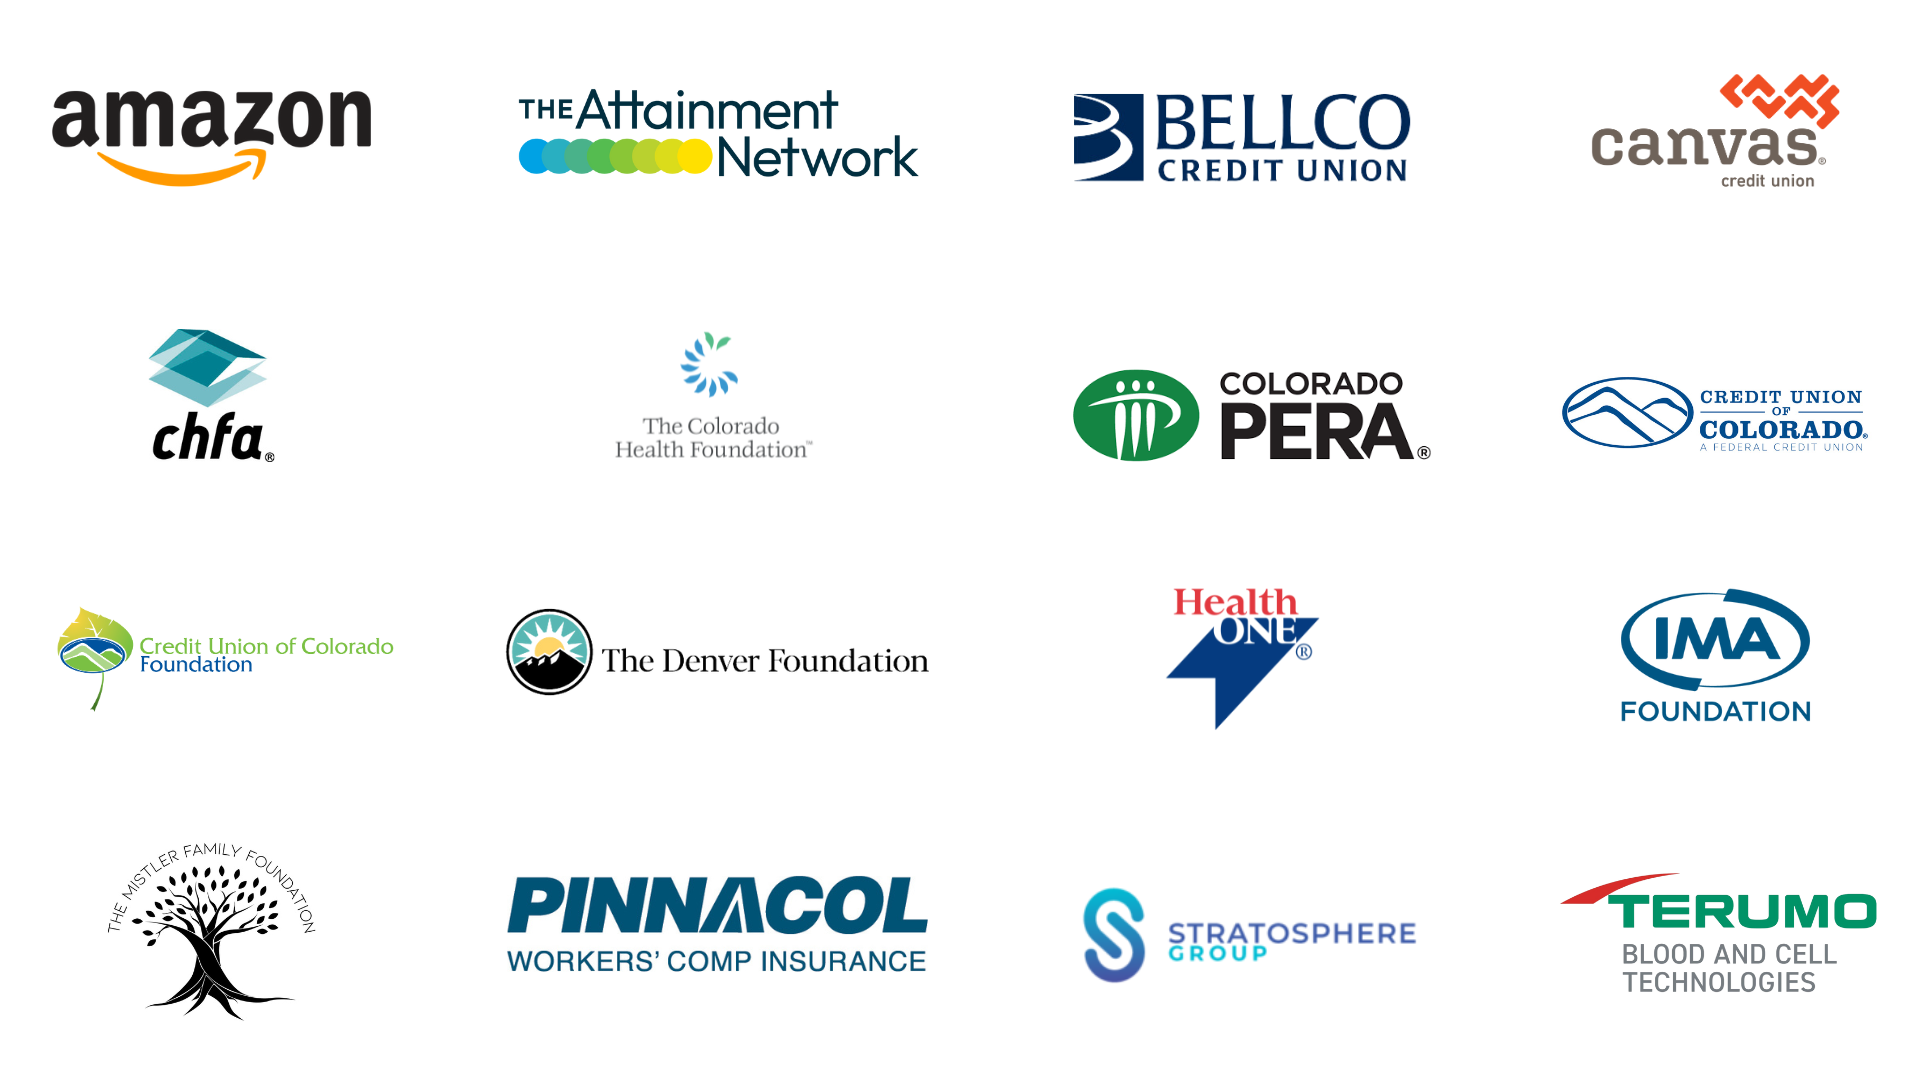 Graphic with collection of Champions Club Donors. Logos include: Amazon, The Attainment Network, Bellco Credit Union, Canvas Credit Union, CHFA, Colorado Health Foundation, Colorado PERA, Credit Union of Colorado, Credit Union of Colorado Foundation, The Denver Foundation, HealthONE, IMA Foundation, The Mistler Family Foundation, Pinnacol Workers’ Comp Insurance, Stratosphere Group, and Terumo Blood and Cell Technologies.